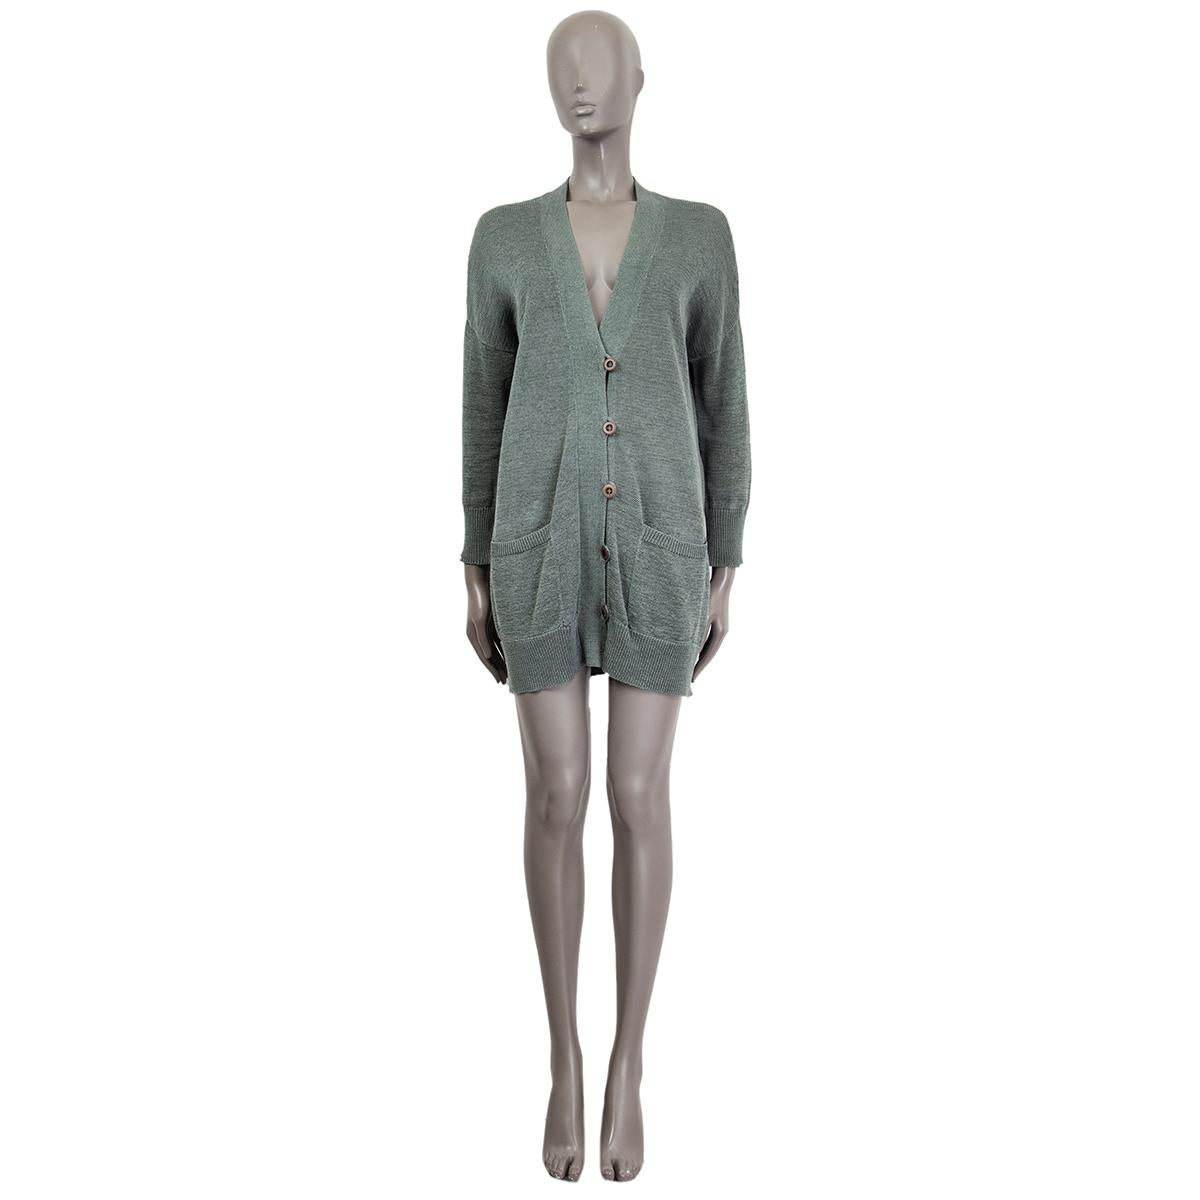 100% authentic Brunello Cucinelli long cardigan in sage cotton (100%) with a v-neck. Closes on the front with buttons. Unlined. Has been worn and is in excellent conditiion. 

Measurements
Tag Size	XS
Size	XS
Shoulder Width	40cm (15.6in)
Bust	118cm